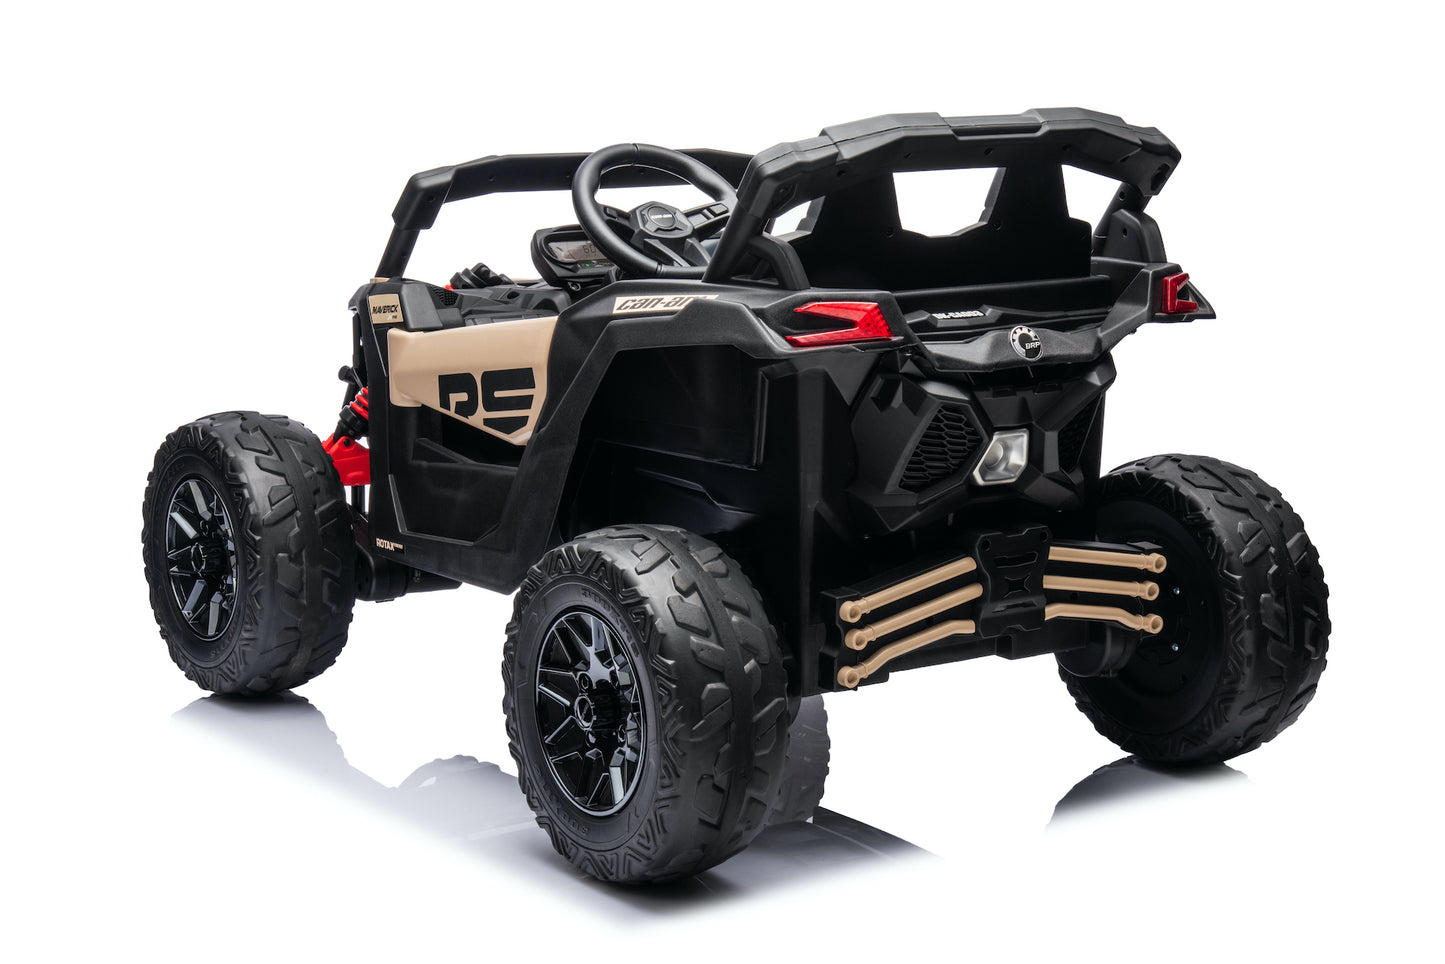 Licensed Can-Am Maverick UTV 24V Kids Ride on Buggy with 4 x Motors and Remote - Khaki